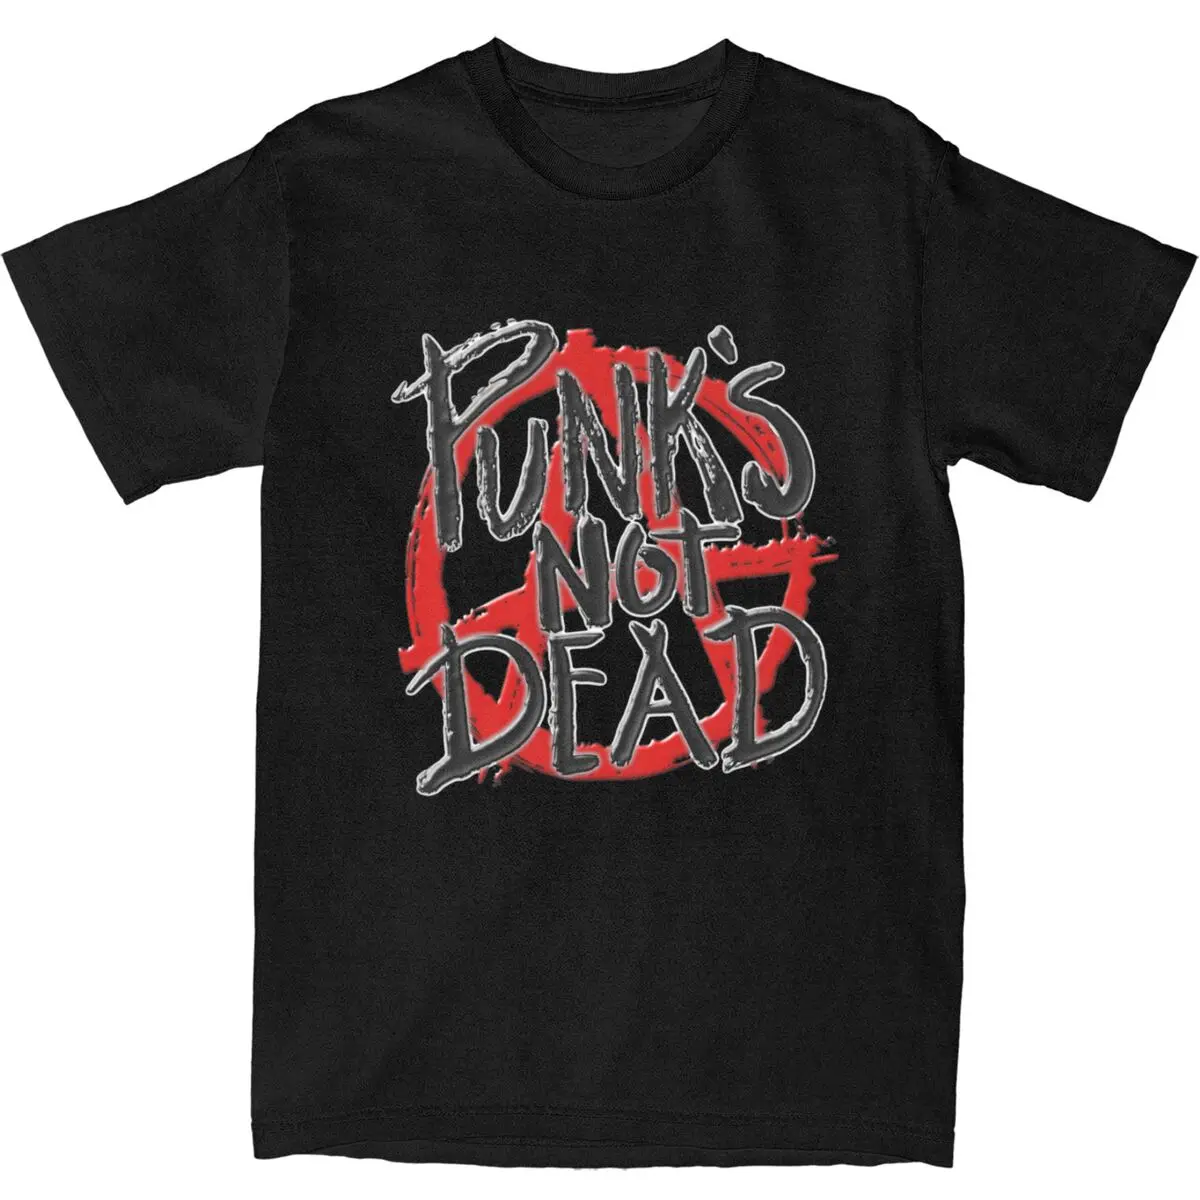 

Punks Not Dead T-Shirt Music Band Novelty T-Shirts Short-Sleeve Vintage Tops Beach Cotton Breathable Plus Size 5XL Clothing